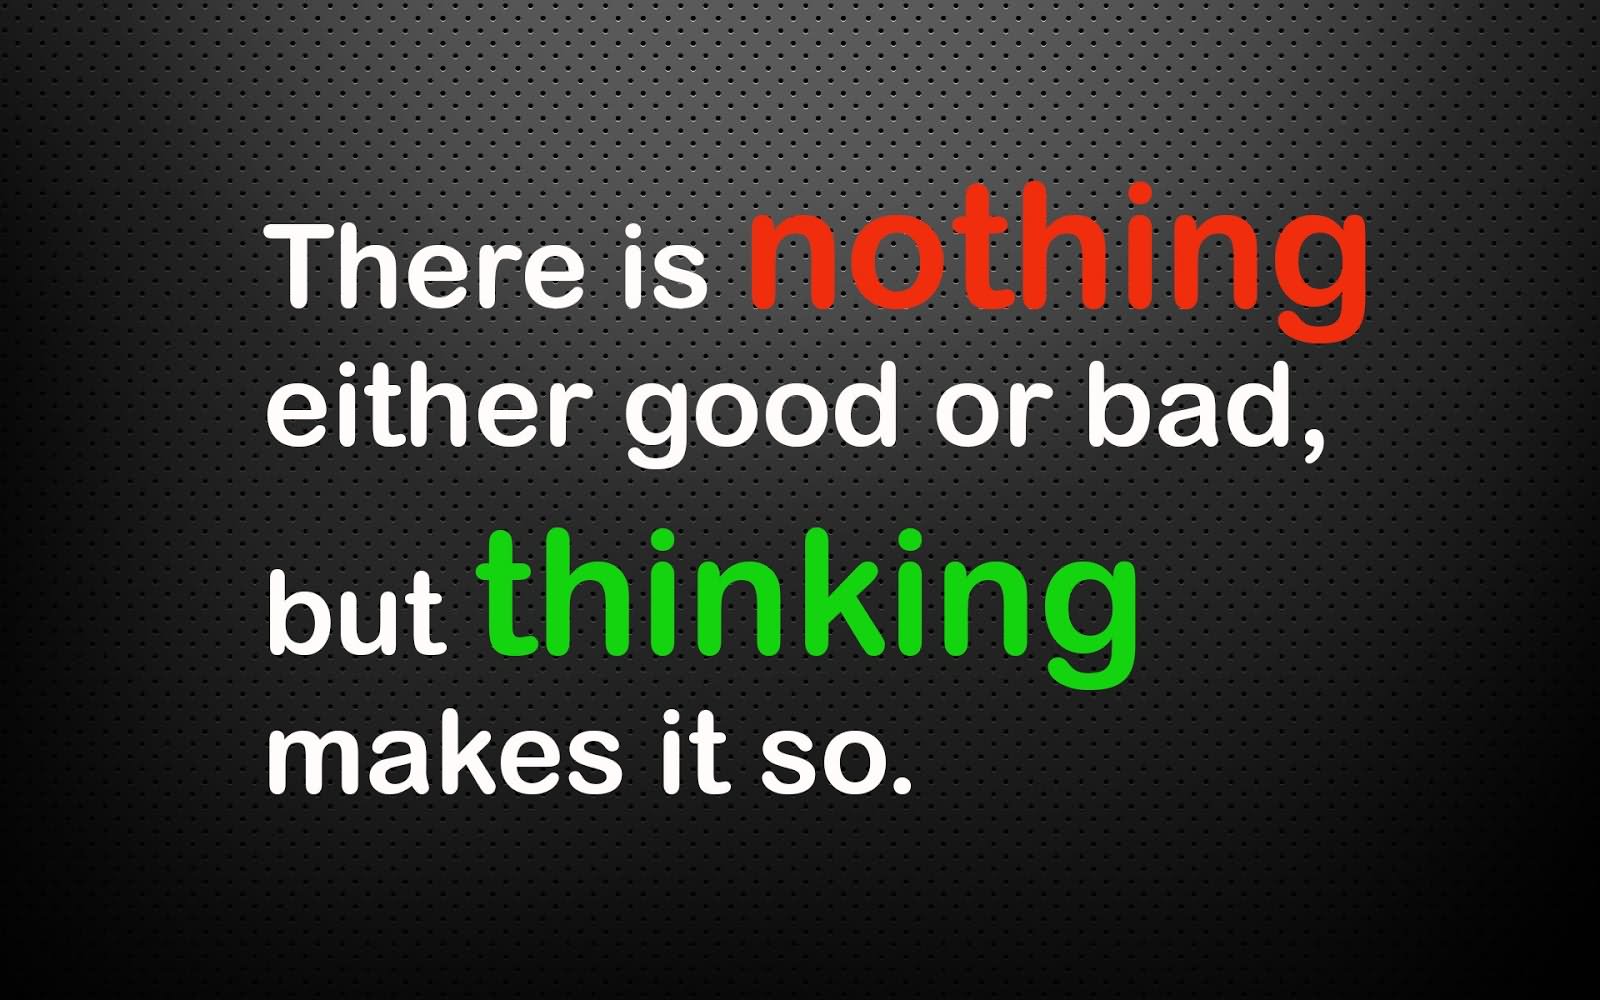 There is nothing either good or bad, but thinking makes it so.